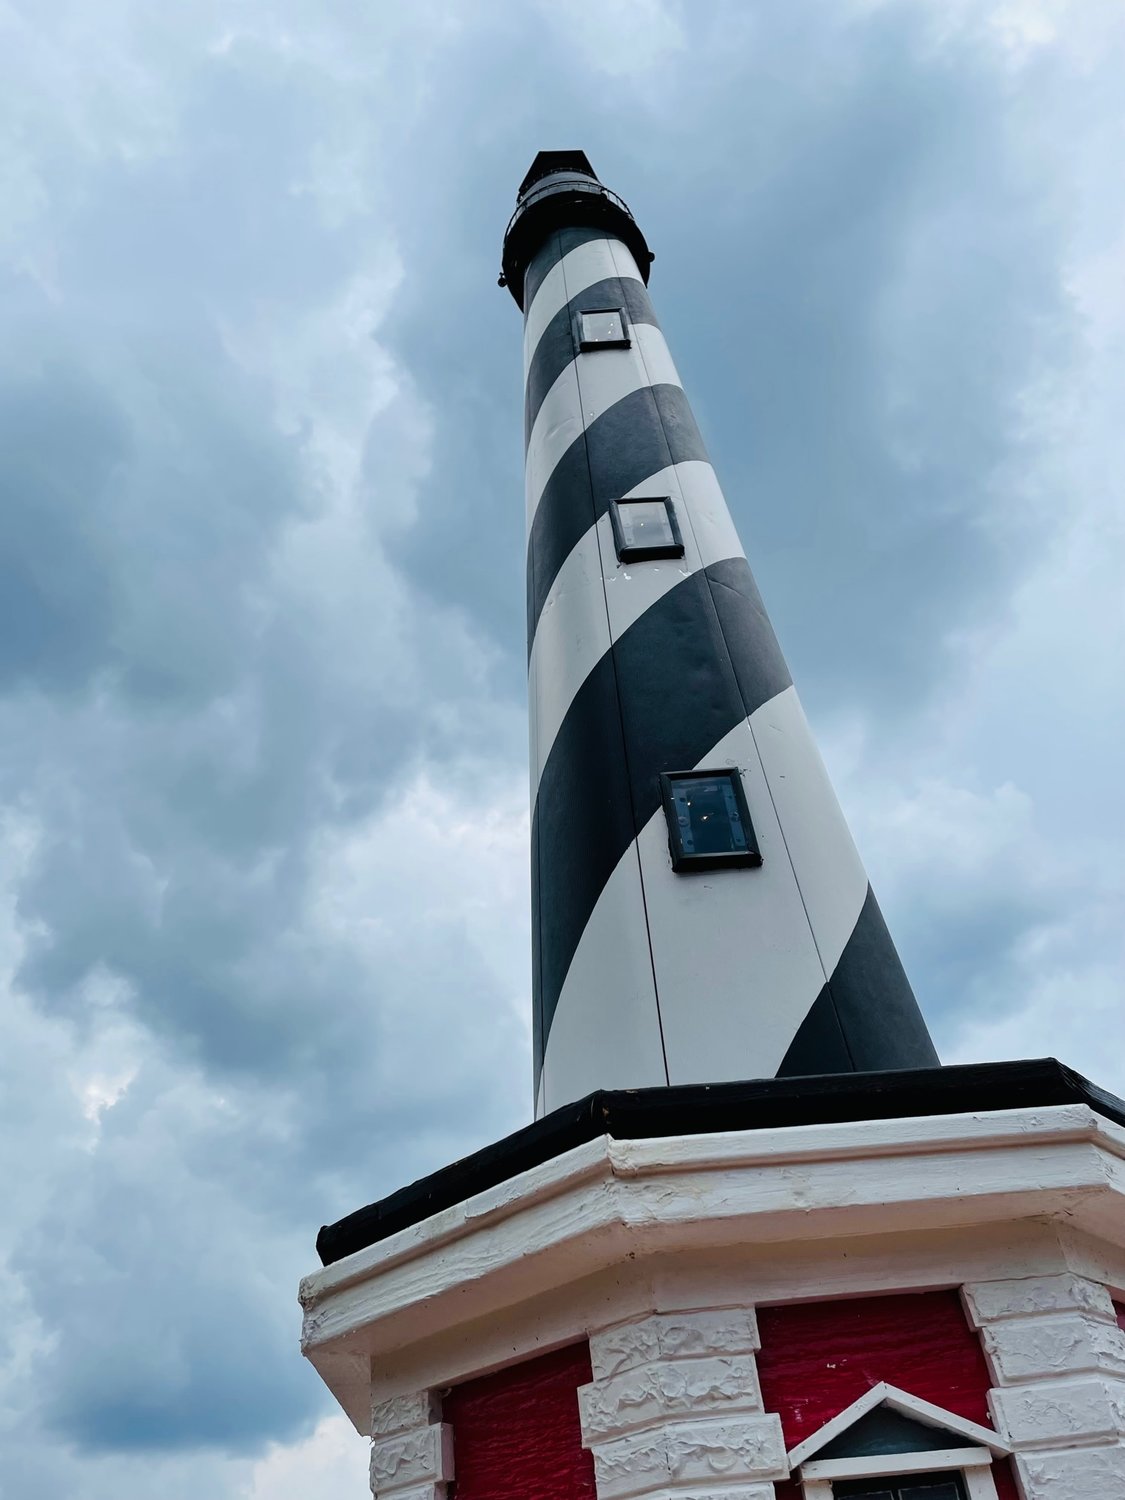 Elbert “Rex’’ Lucas restored a lighthouse in honor of his friend Billie Hooks, who he says was ‘crazy about lighthouses and had to have one.’ He spent about four months restoring the structure, which is about 13 feet tall.